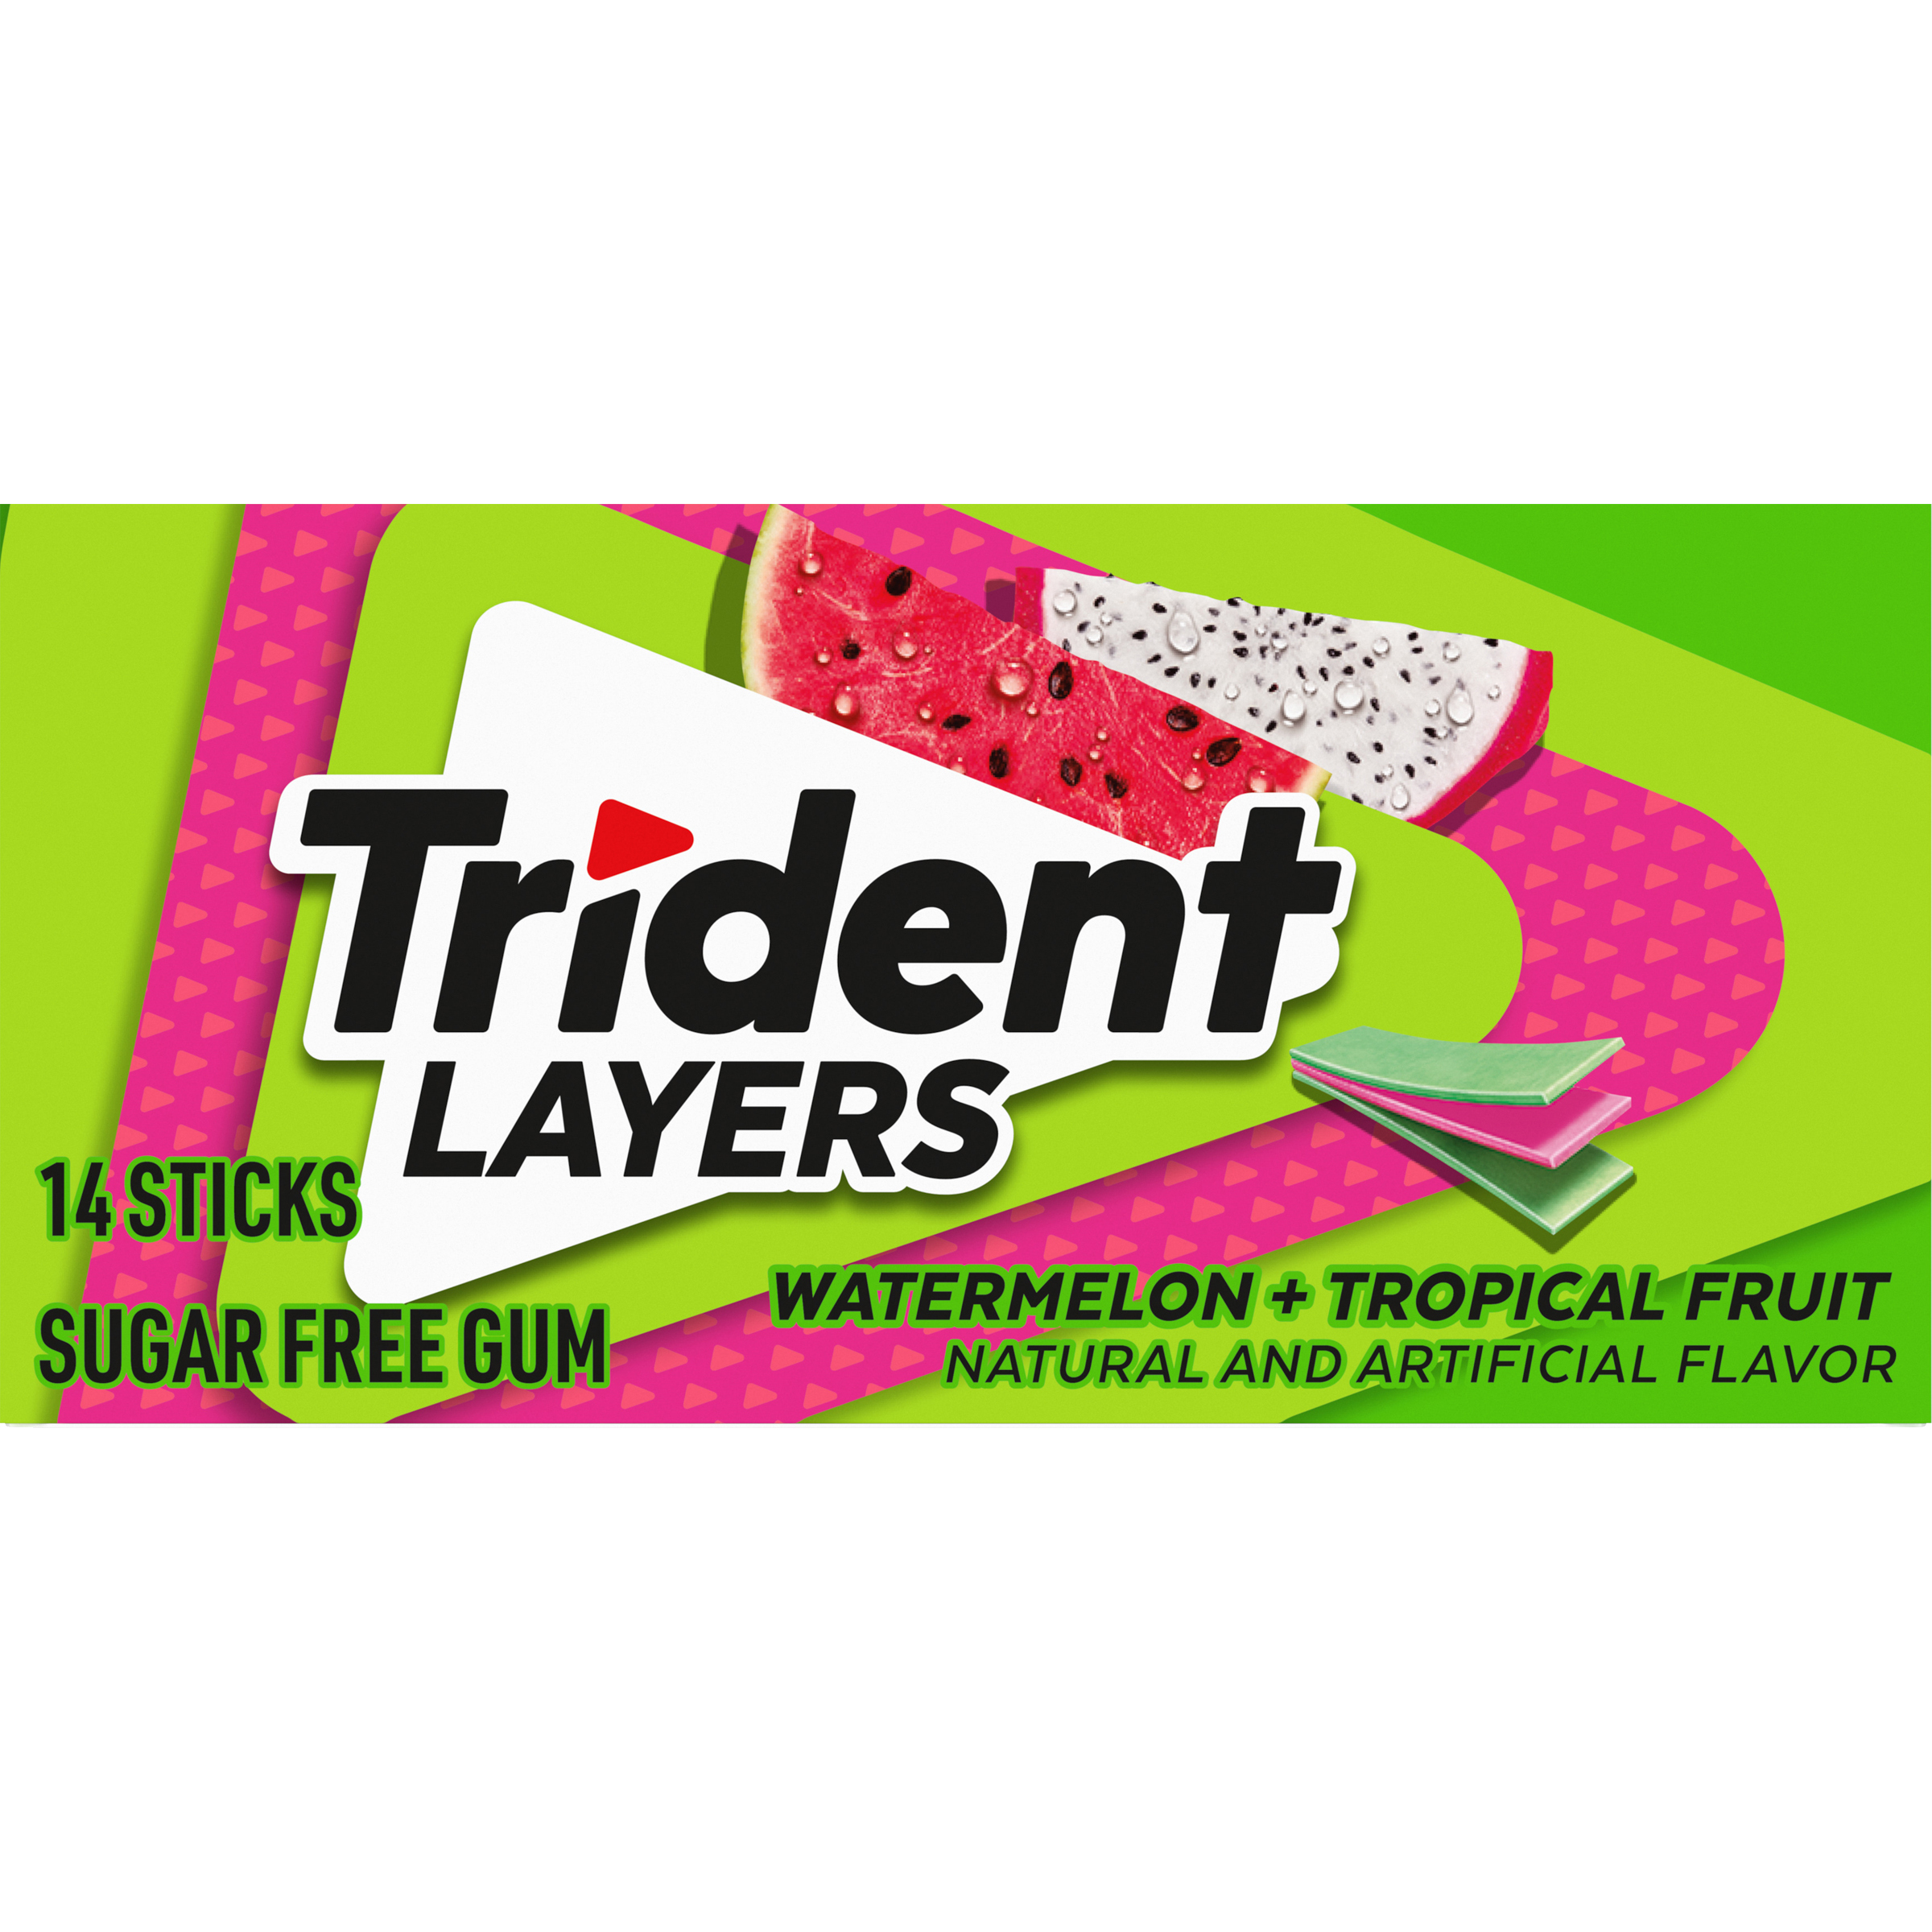 Trident Layers Watermelon & Tropical Fruit Sugar Free Gum, 12 Packs of 14 Pieces (168 Total Pieces)-3